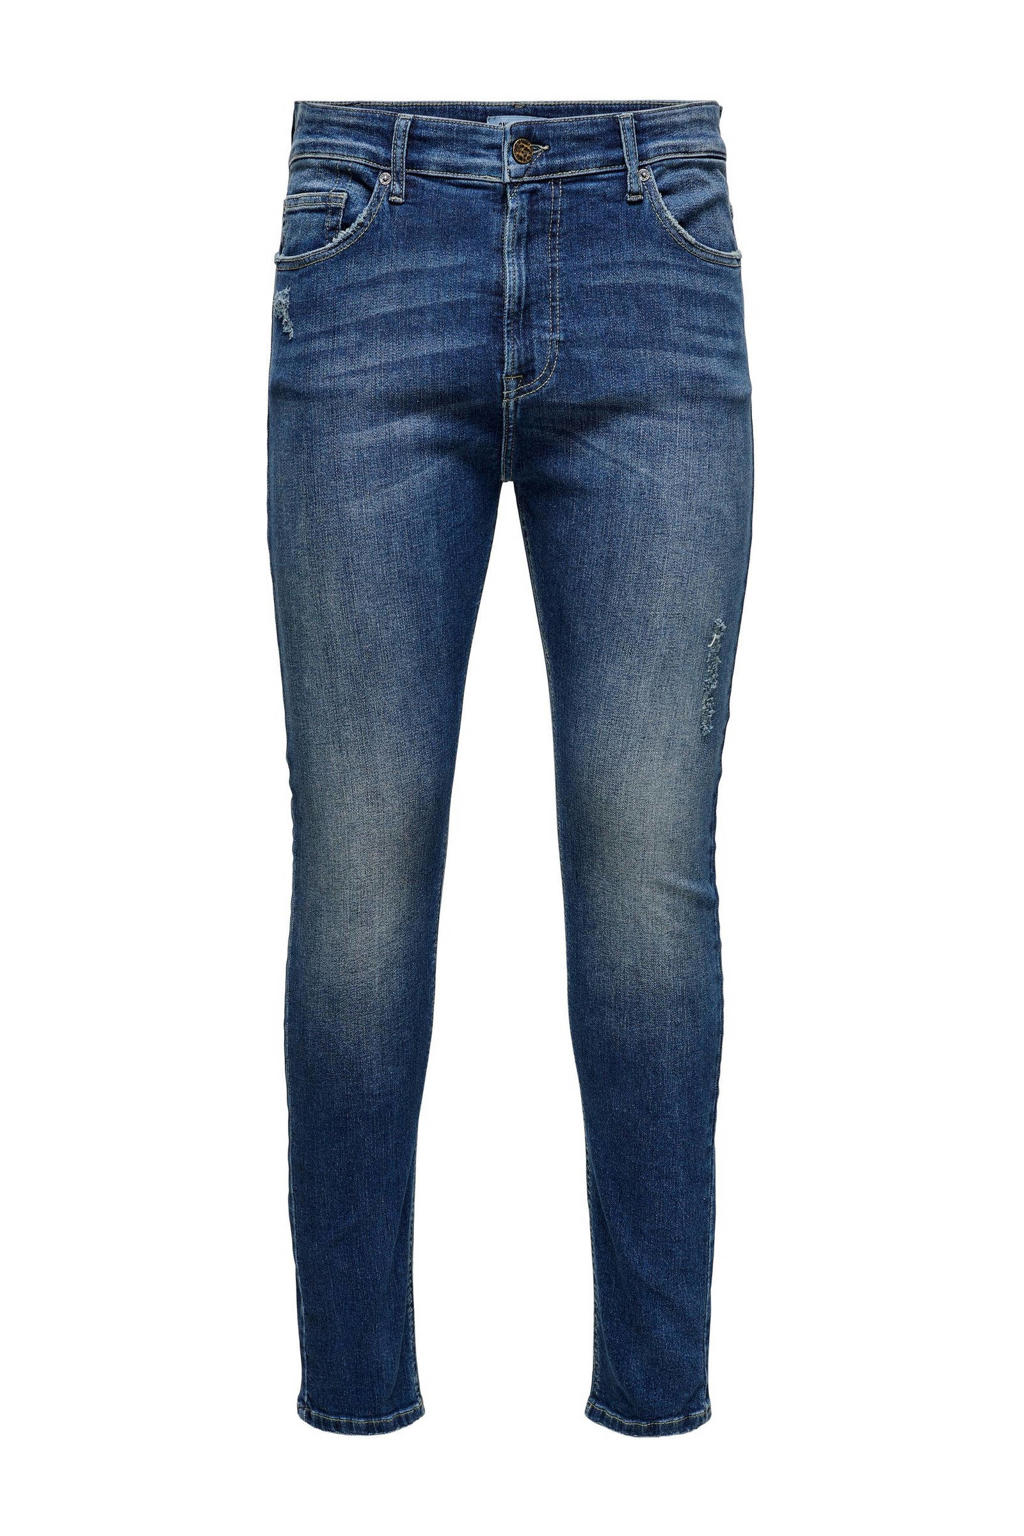 ONLY & SONS tapered fit jeans ONSDRAPER blue denim 1414